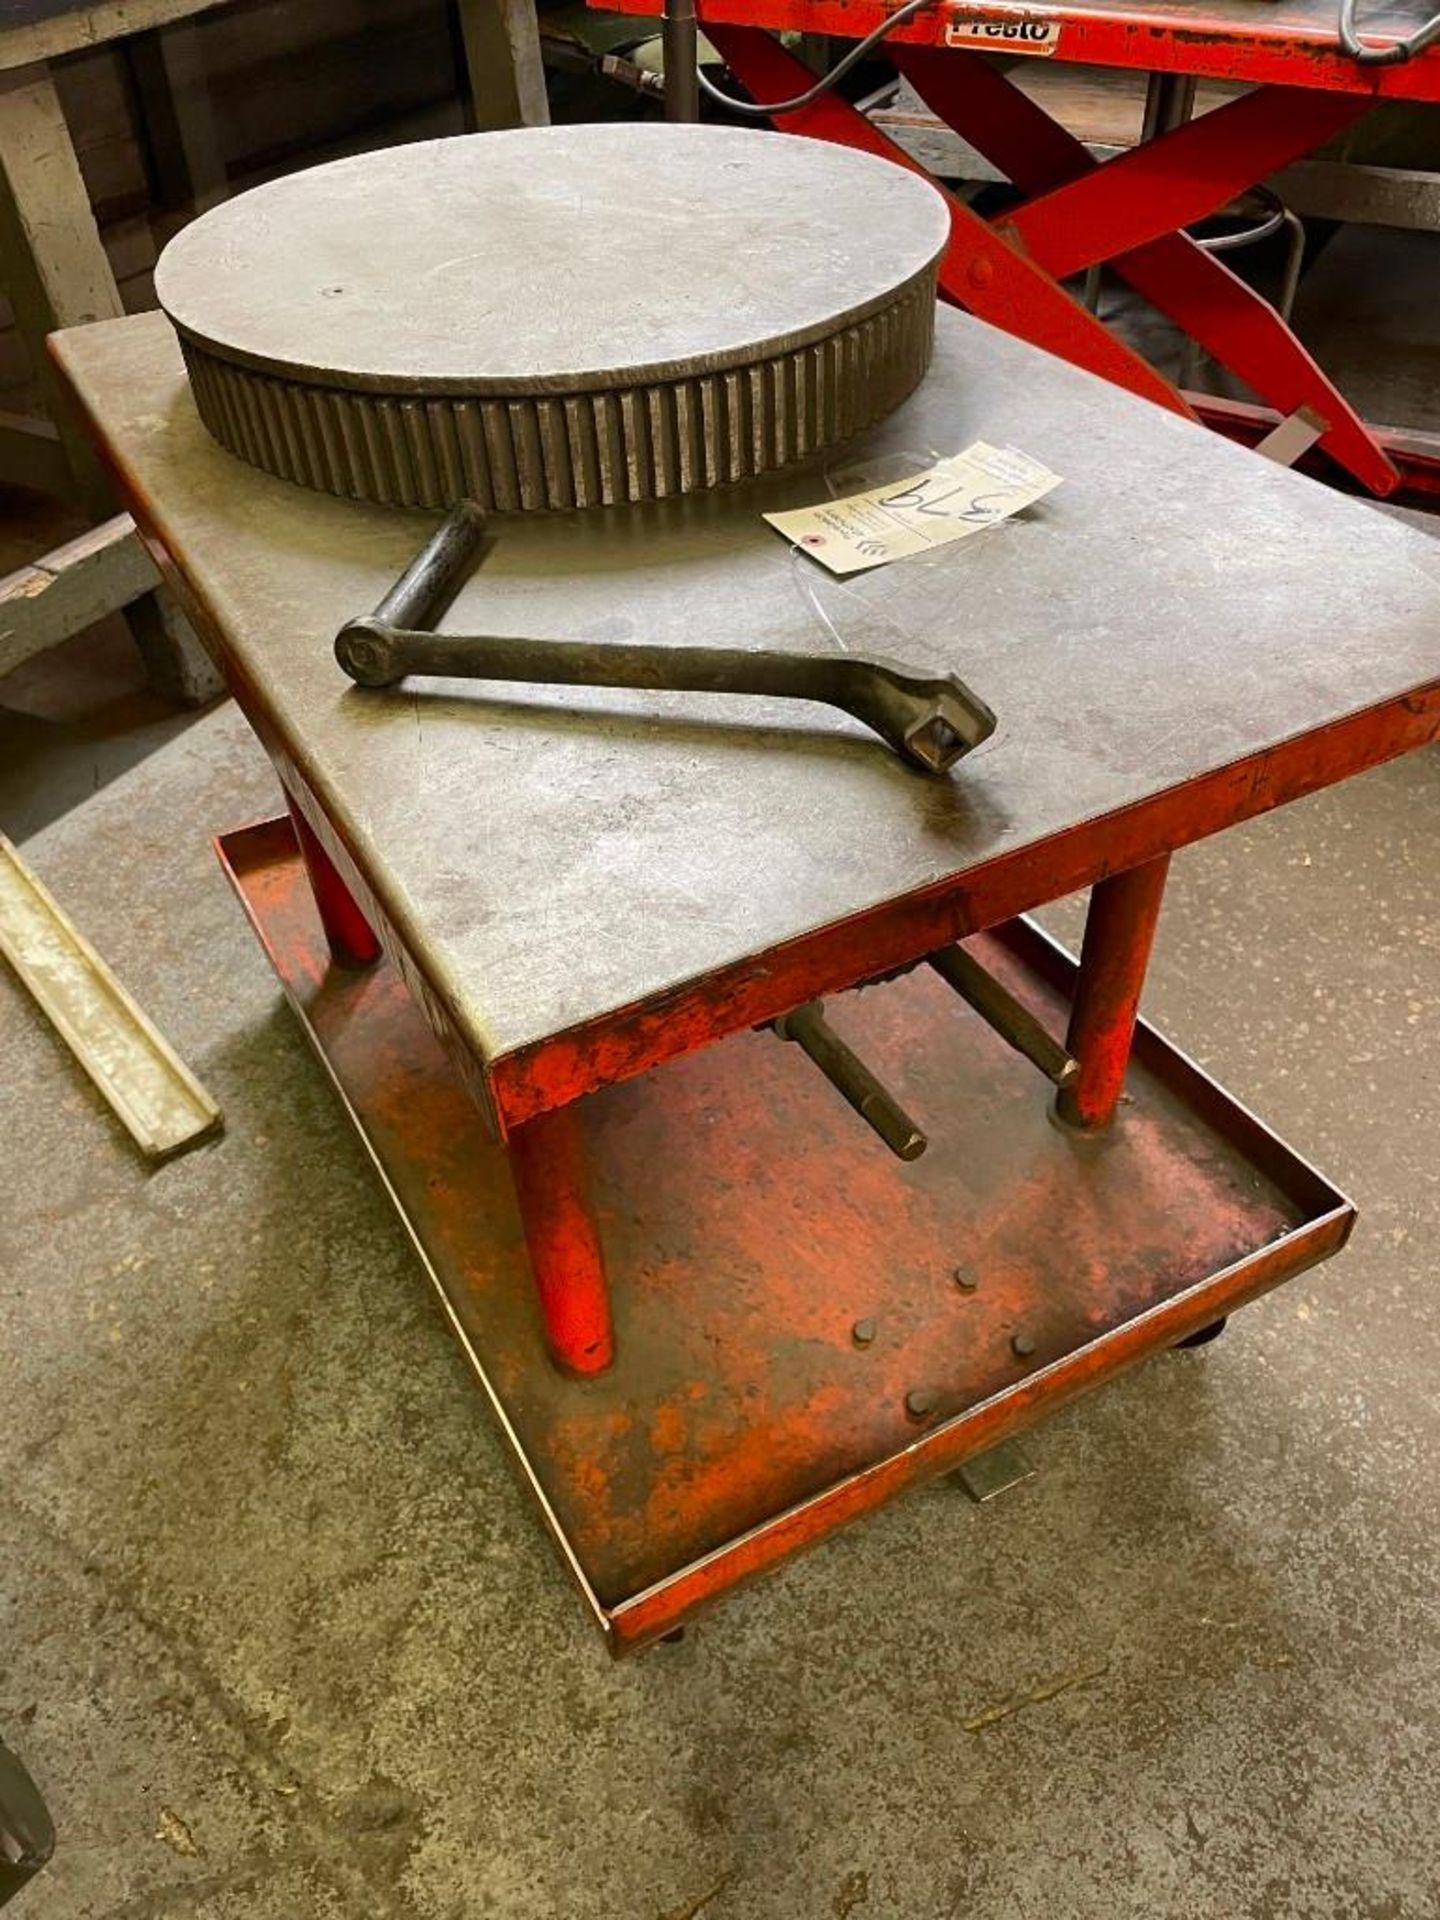 LEE ENGINEERING COMPANY P2436 MANUAL LIFT TABLE - Image 2 of 4